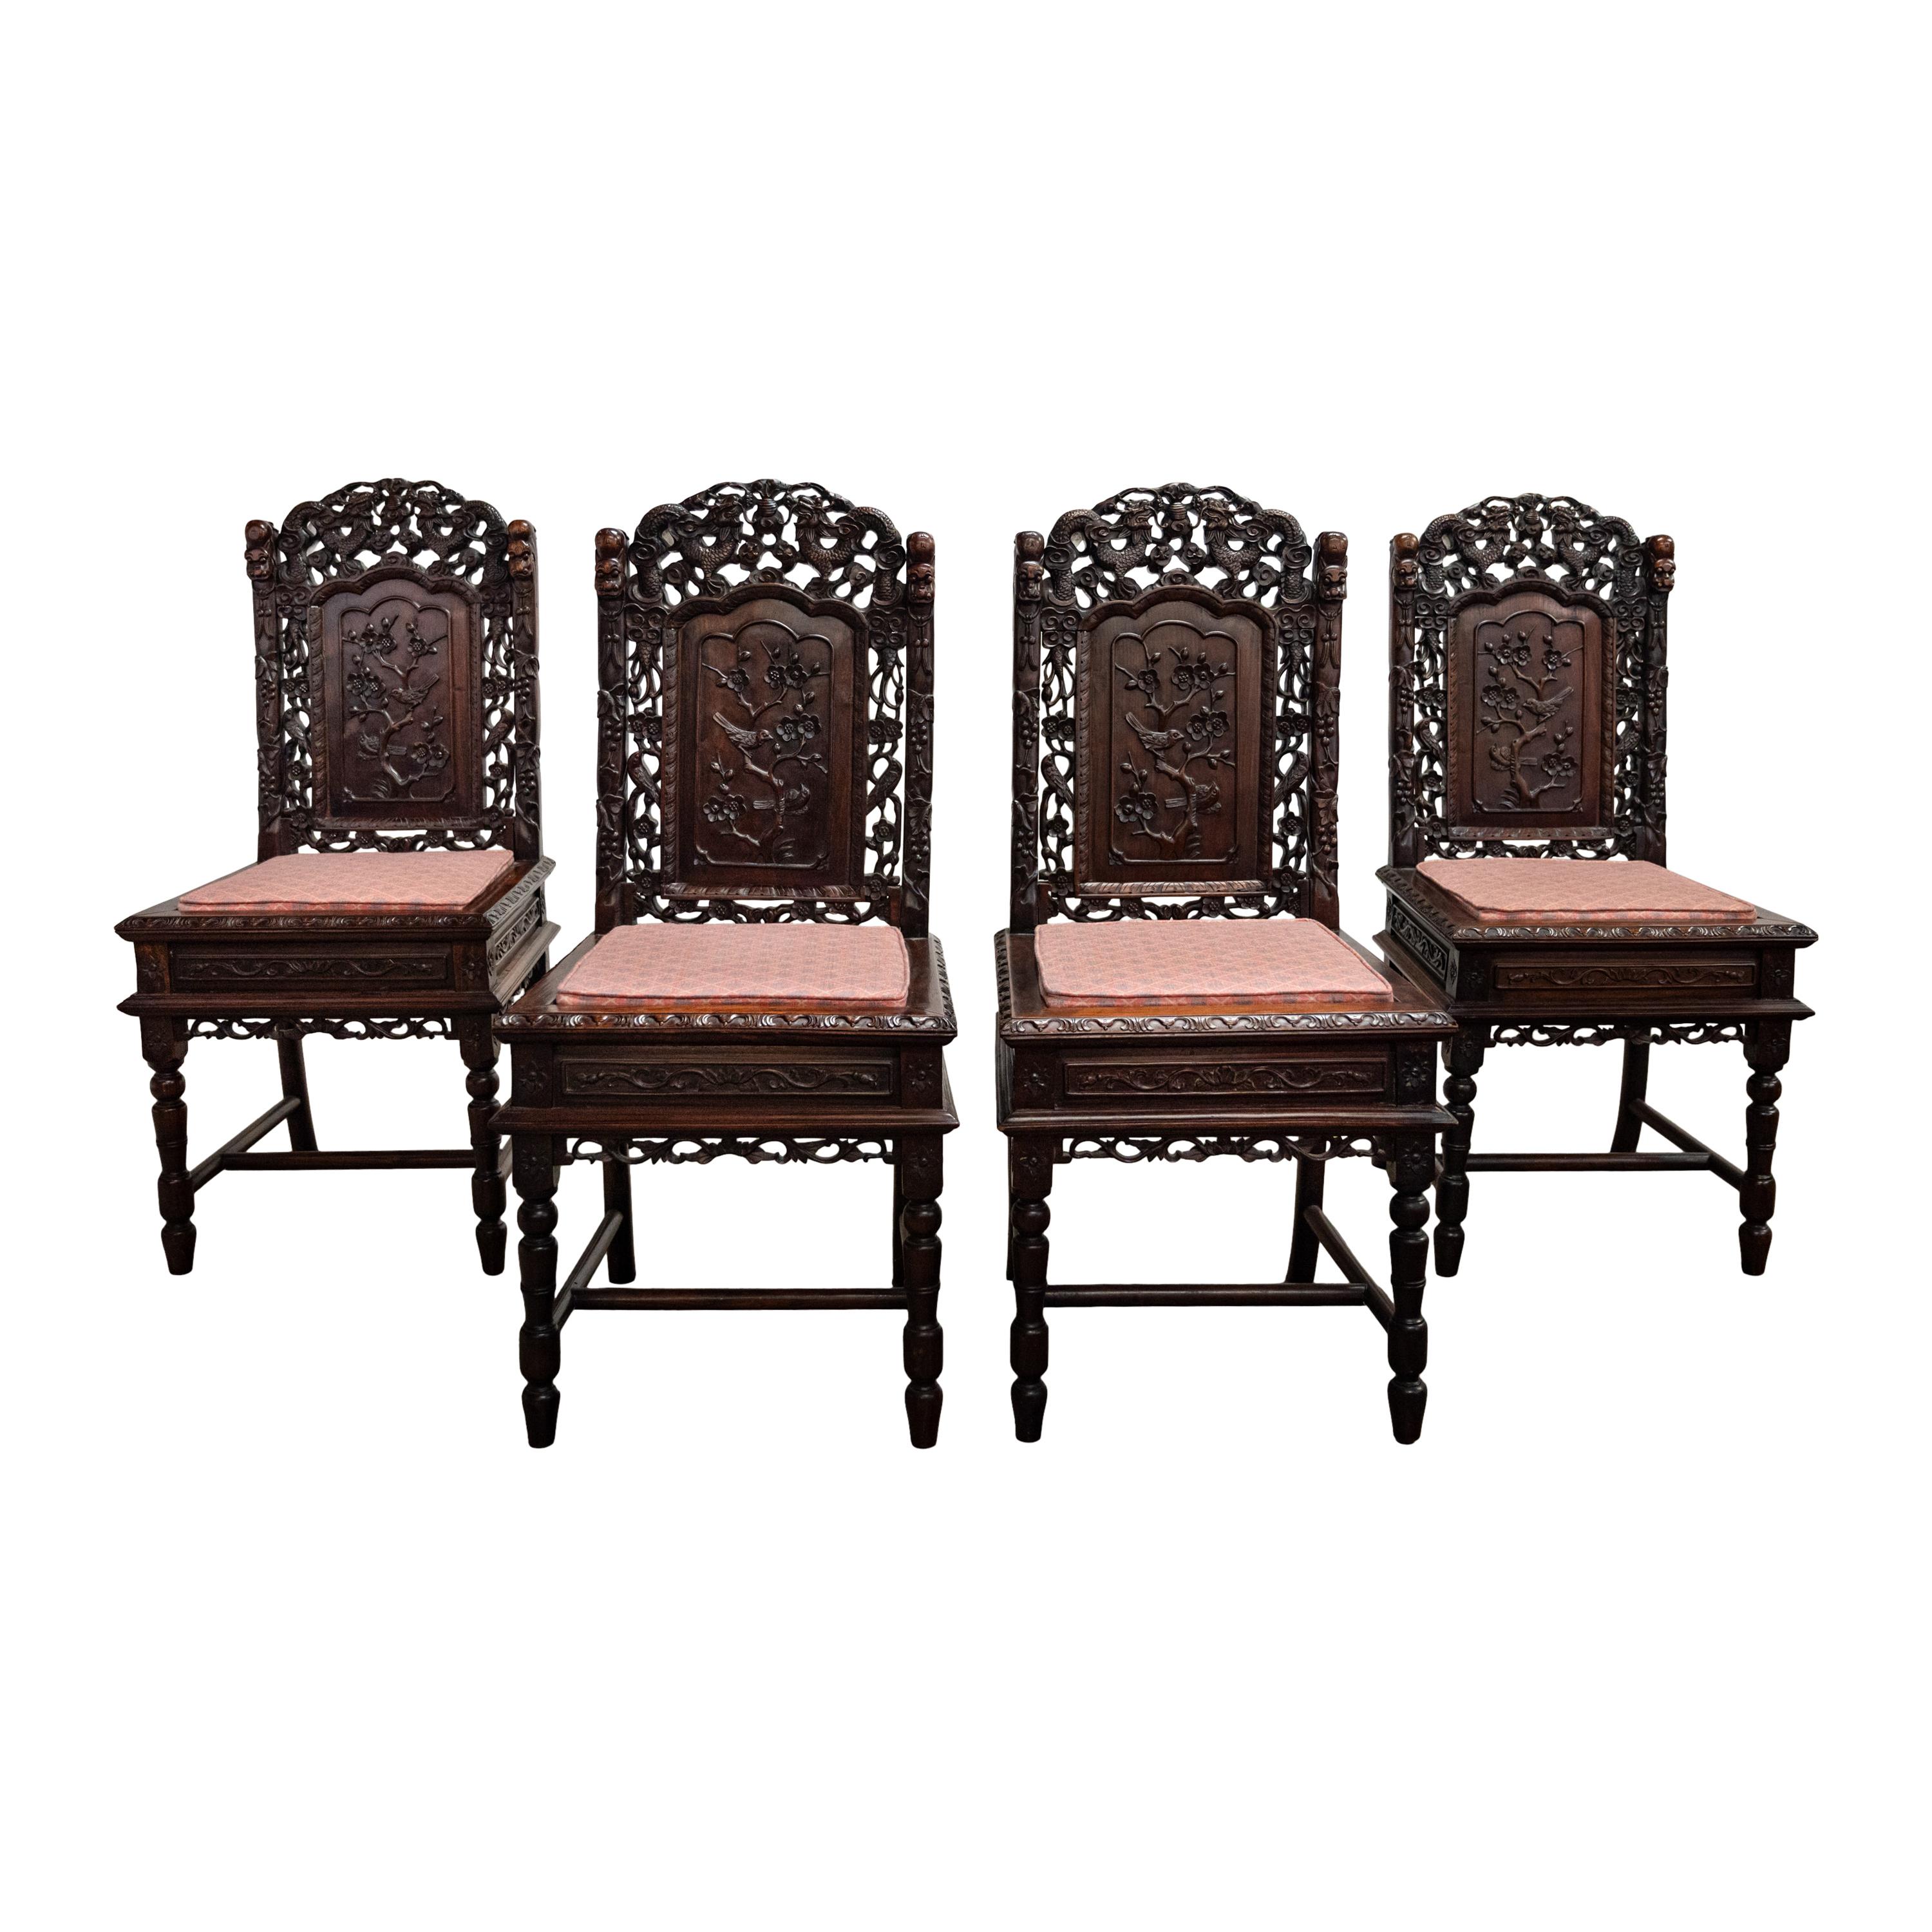 Vier antike Qing Dynasty Chinese Carved Rosewood Side Dining Dragon Chairs 1880 (Chinesisch) im Angebot